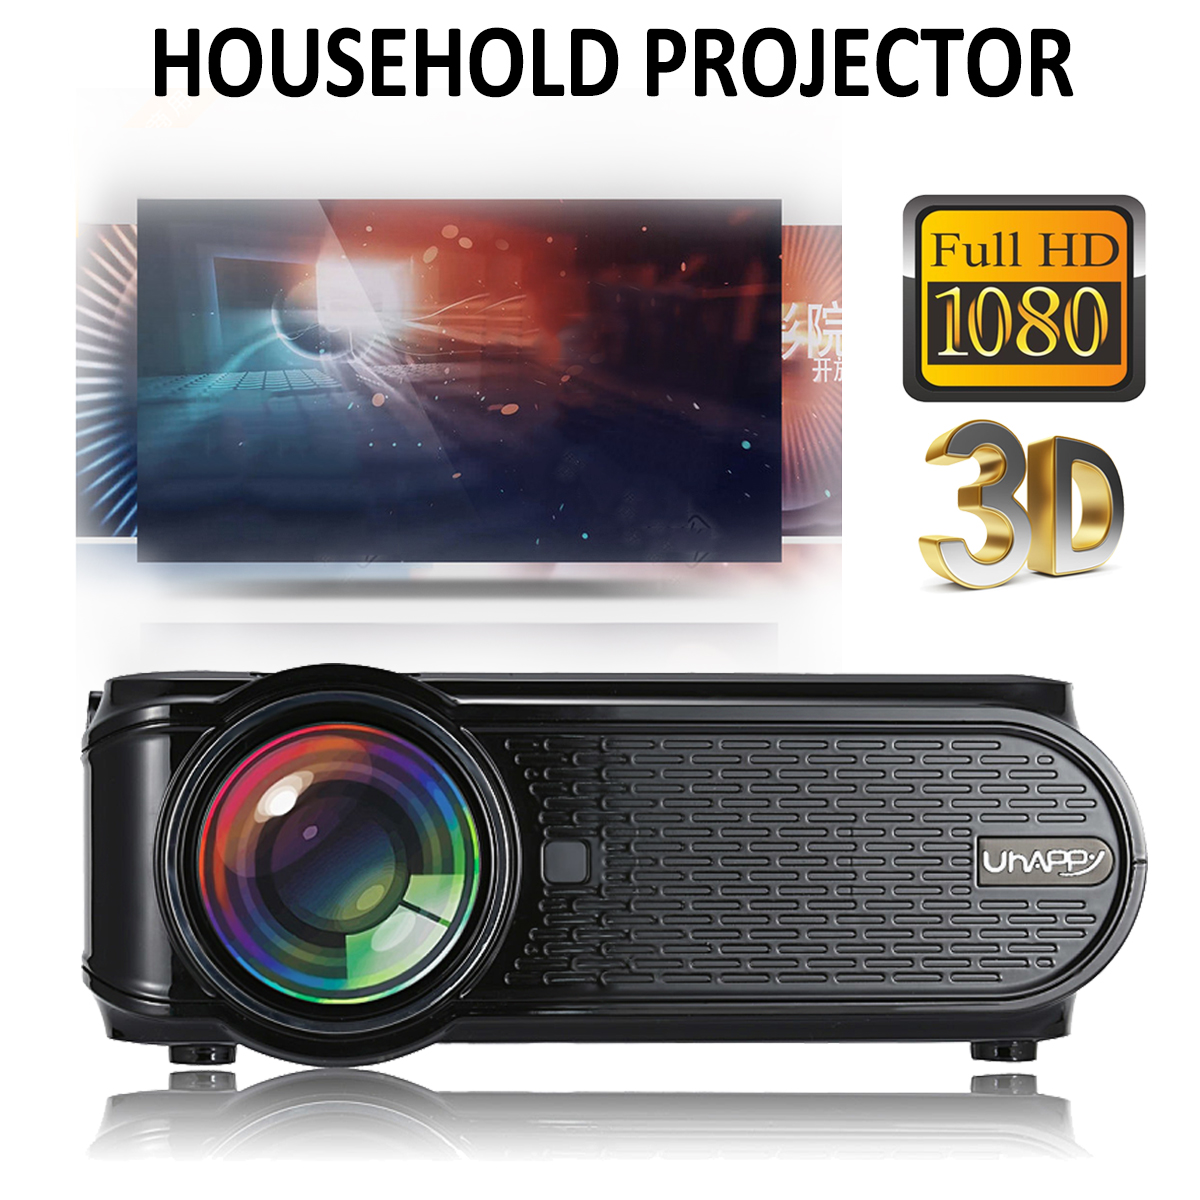 UHAPPY U90 Black Android 6.0 2000 Lumens LED WiFi bluetooth 4.0 Projector 800 x 480 Support 1080p 11